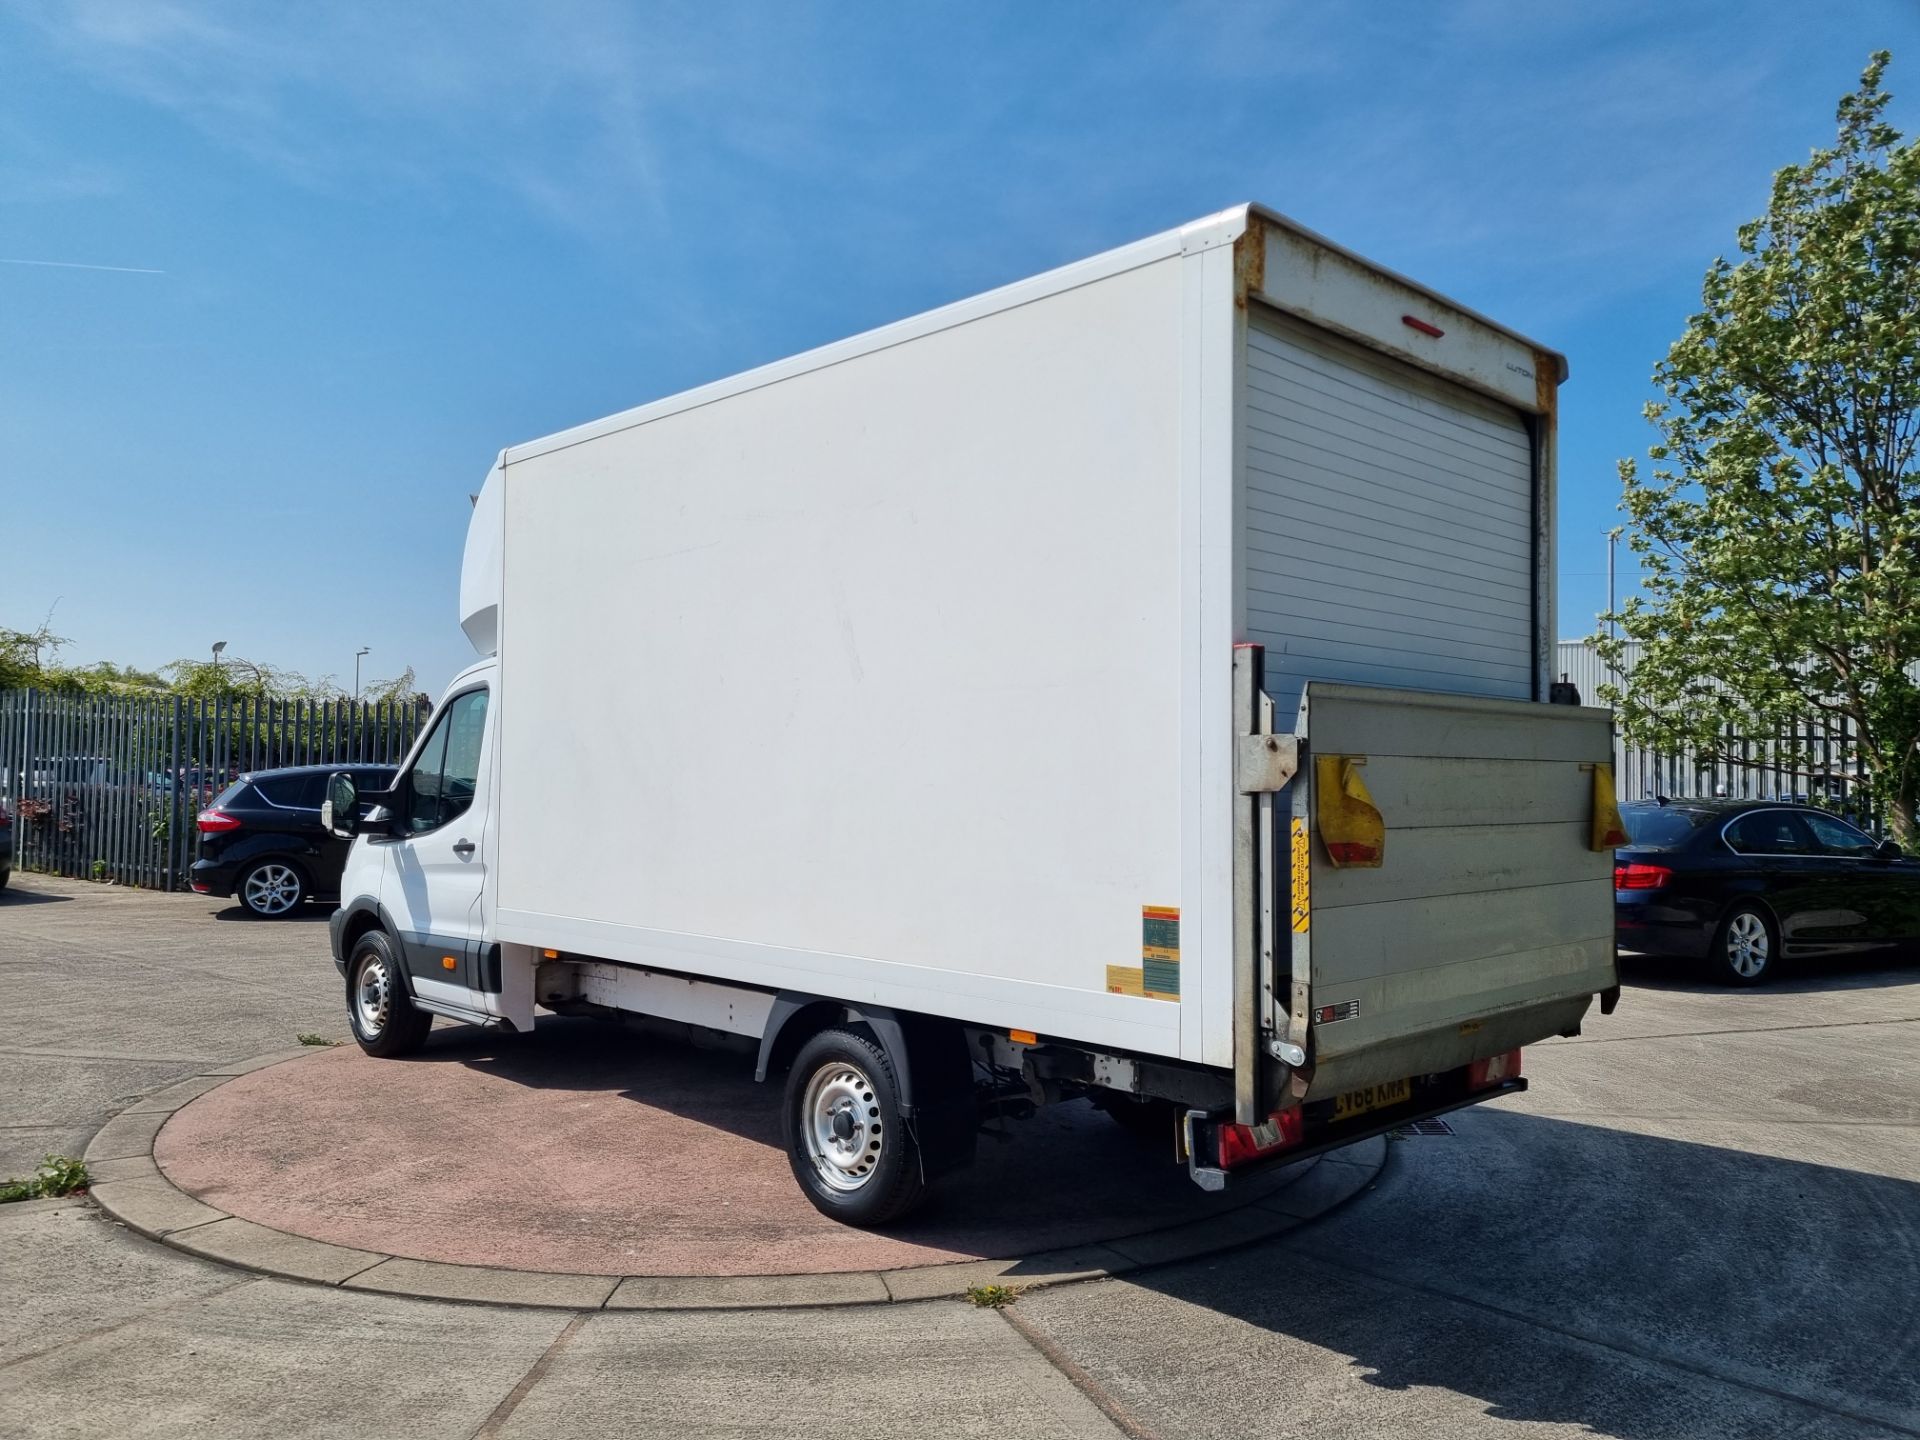 2018 Transit Luton with tail lift - Image 3 of 14